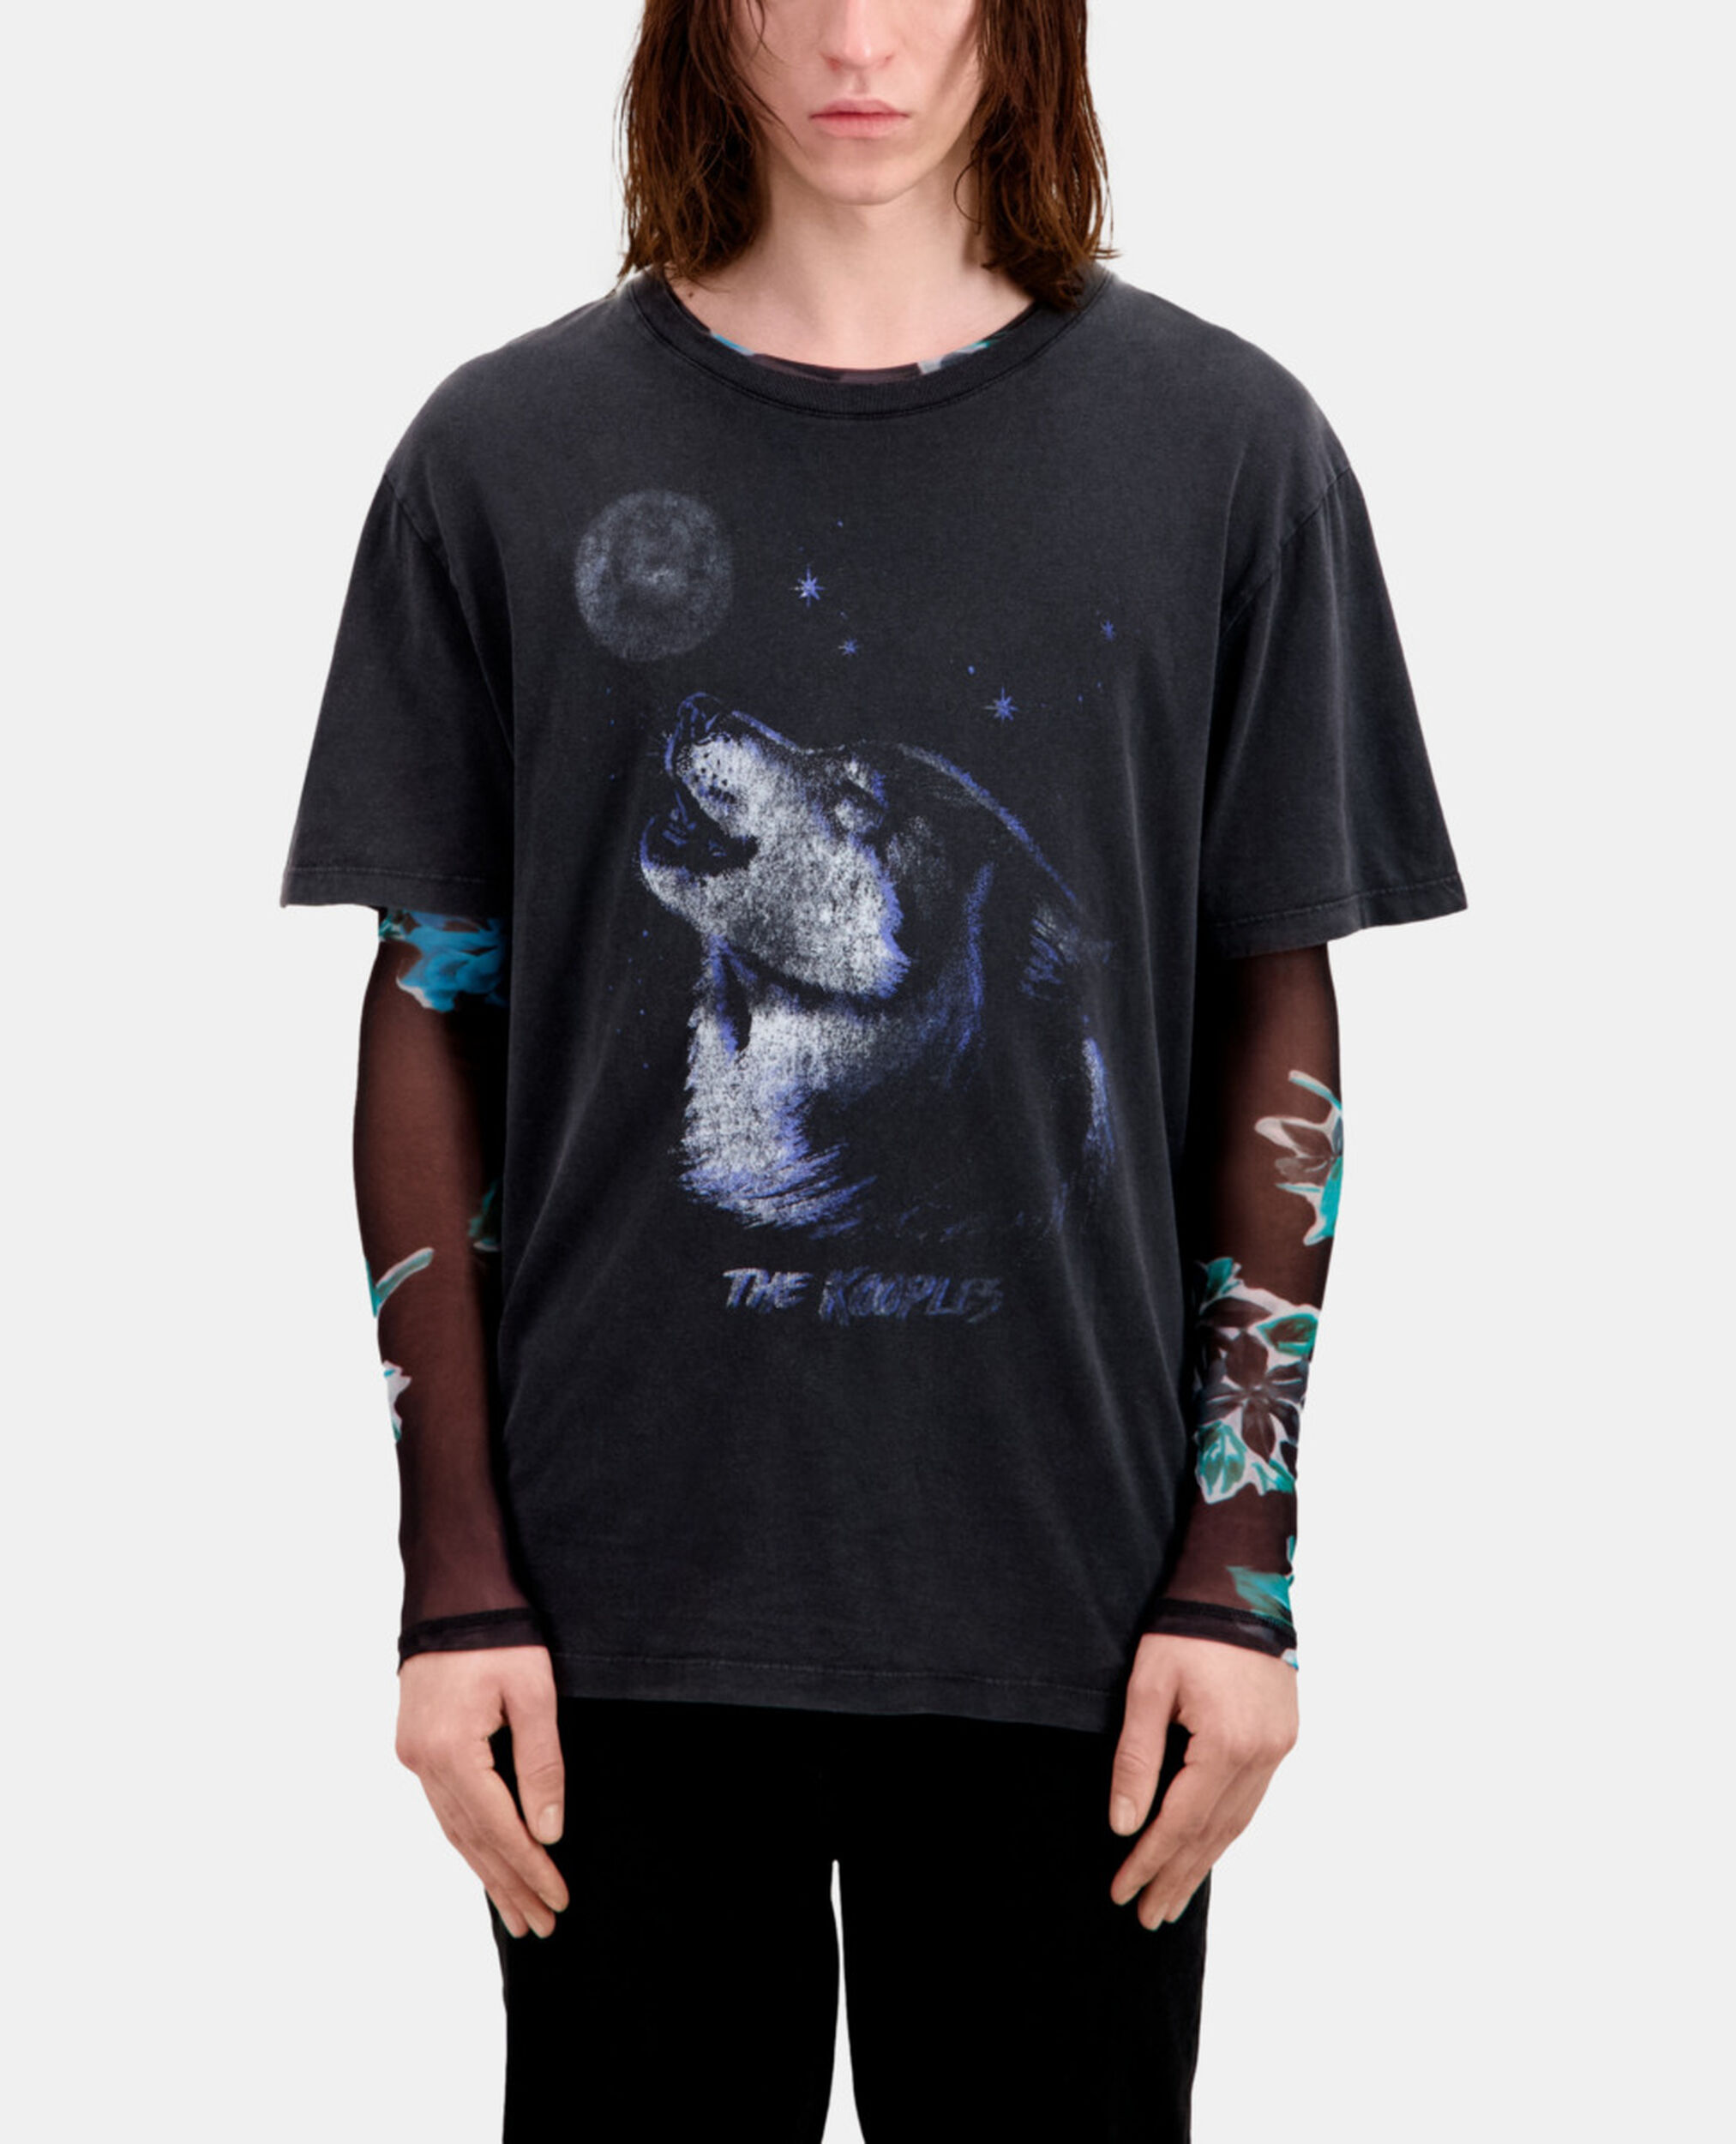 Men's black t-shirt with wolf serigraphy, BLACK WASHED, hi-res image number null